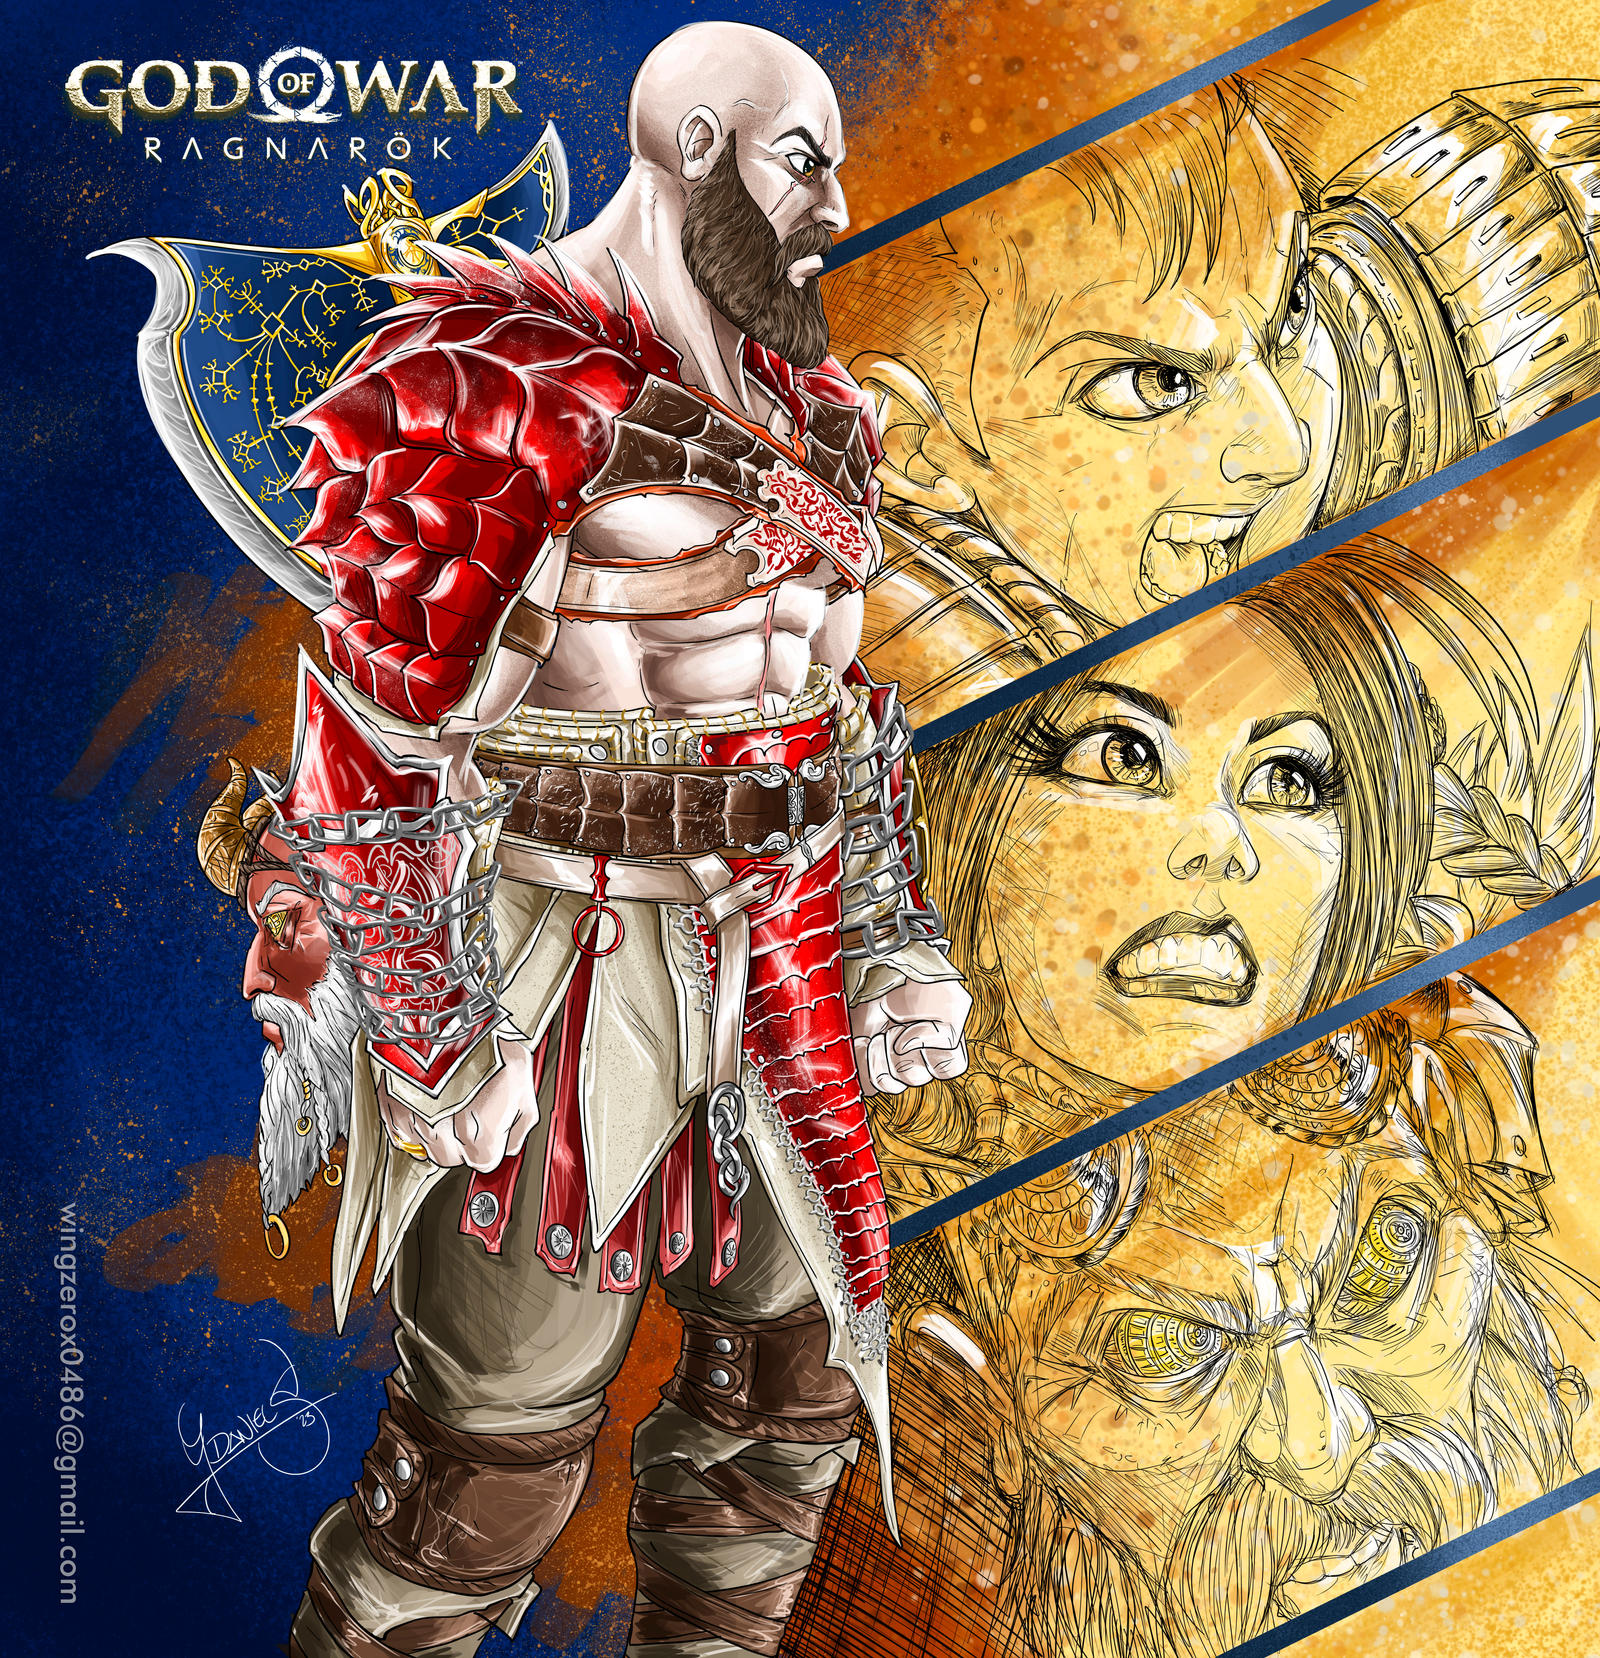 Thor God of War by wingzerox86 on DeviantArt